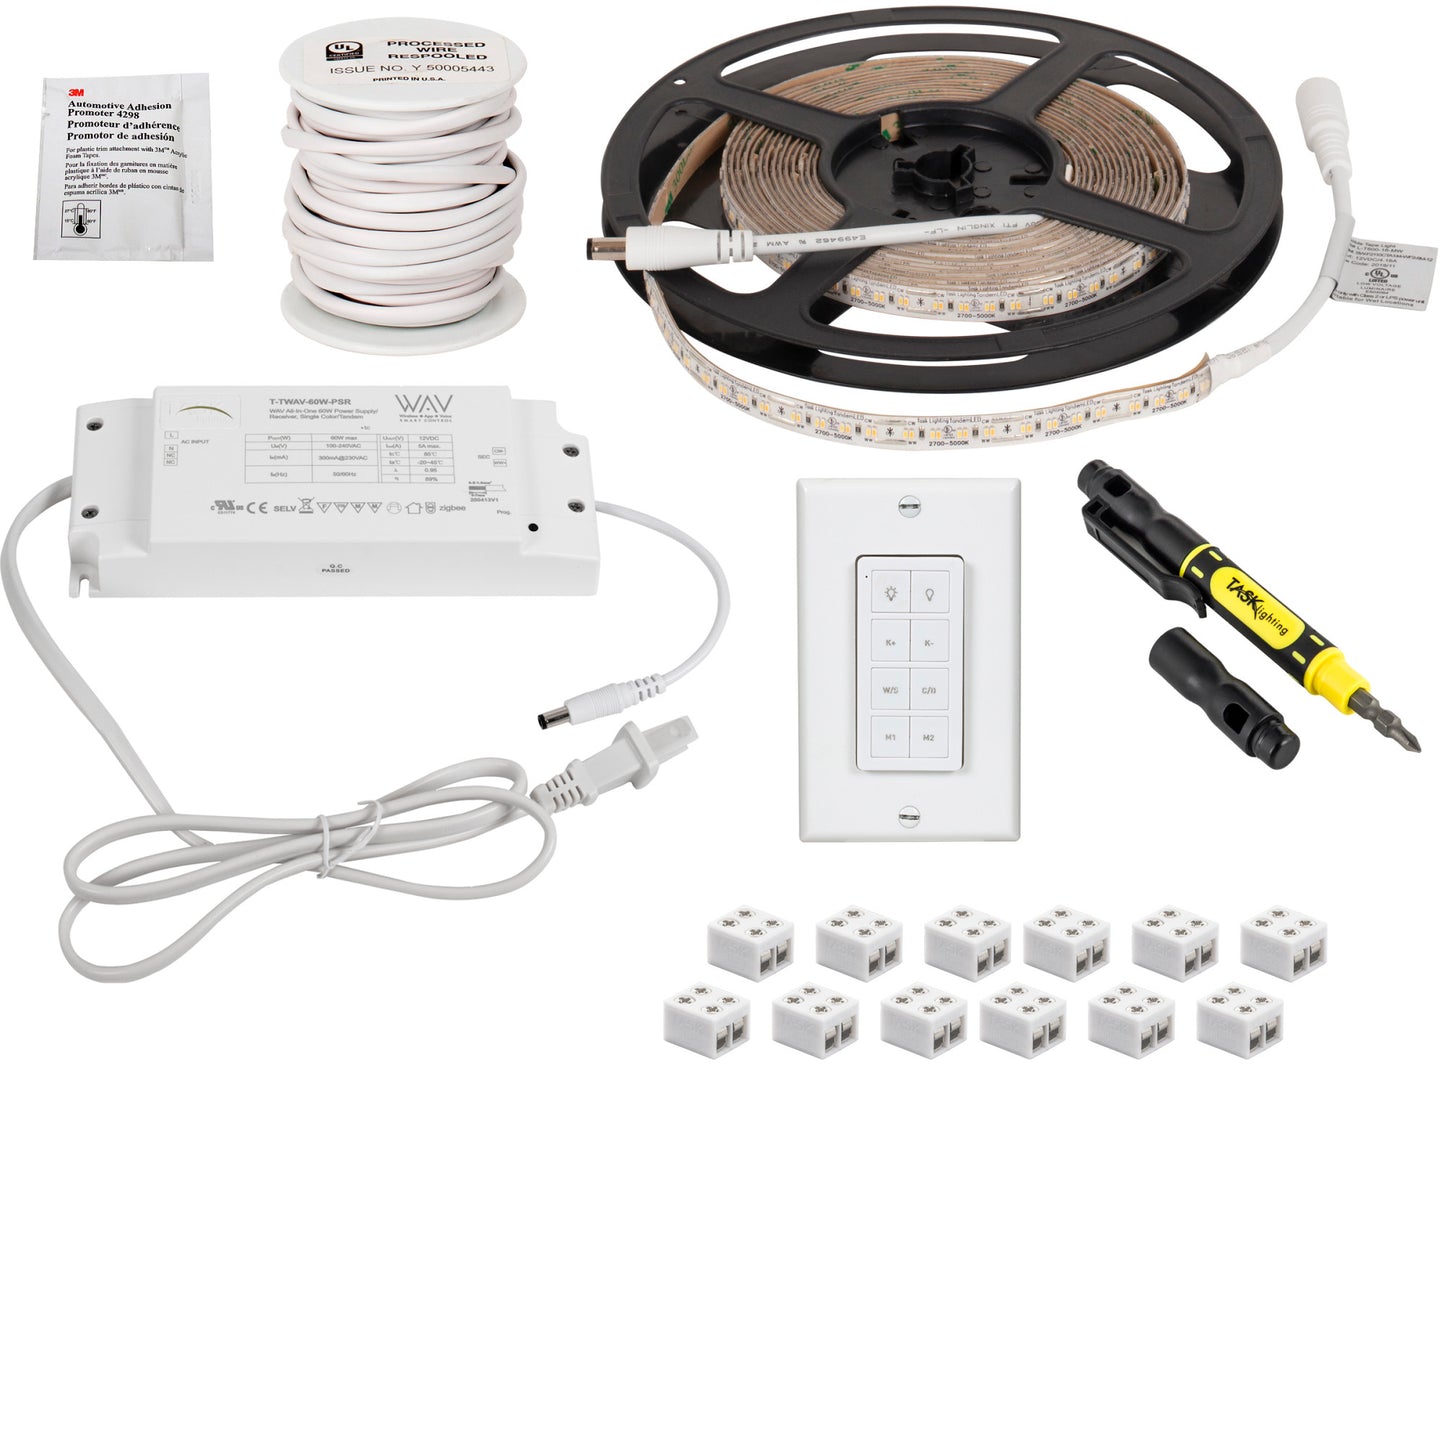 Task Lighting 16 Ft.. 300 Lumens/Ft.. 12-volt Standard Output Wired Controller Tape Light Kit 1 Zone 1 Area, Tunable-White, L-TWCK-16